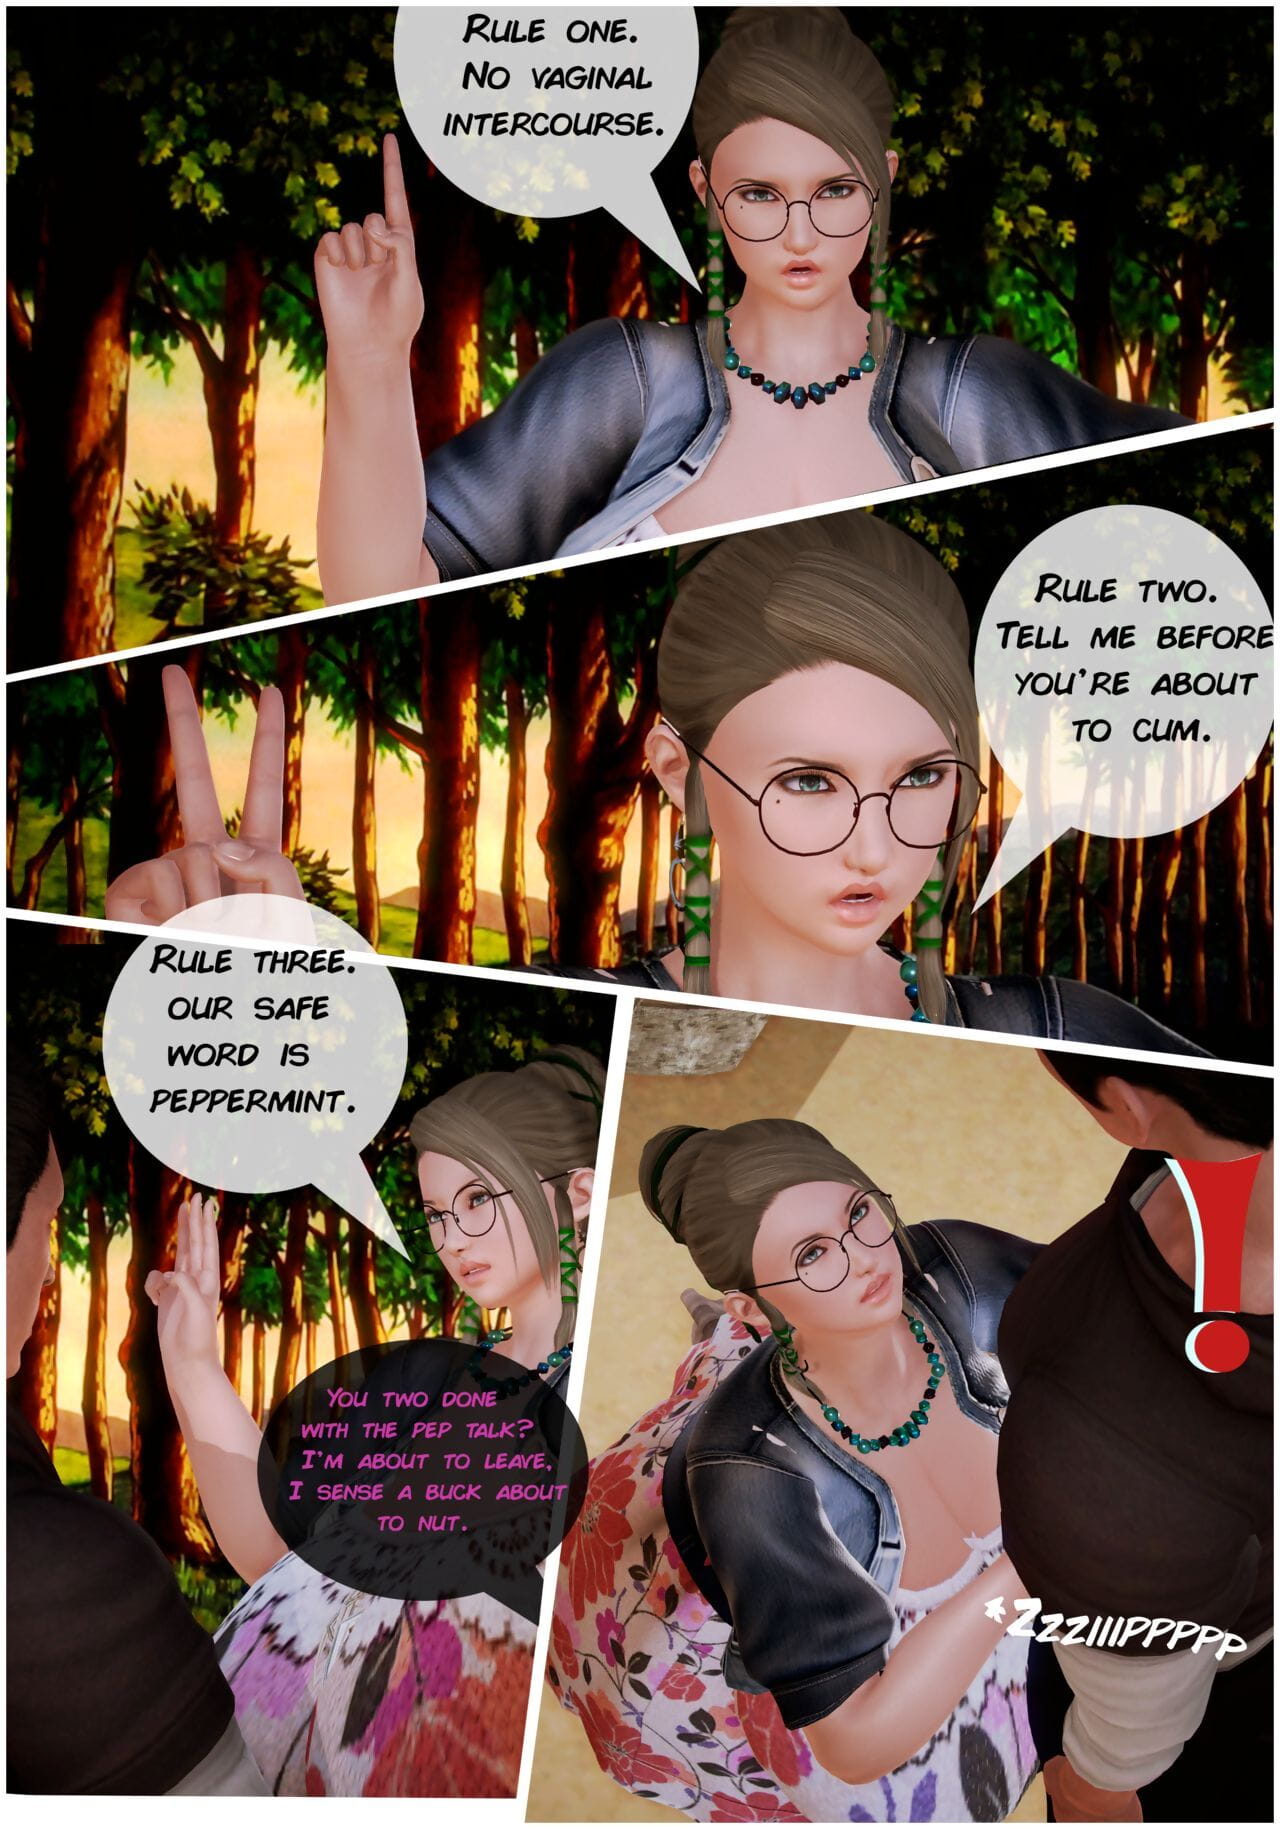 Enchanted Realms Issue 1 page 1